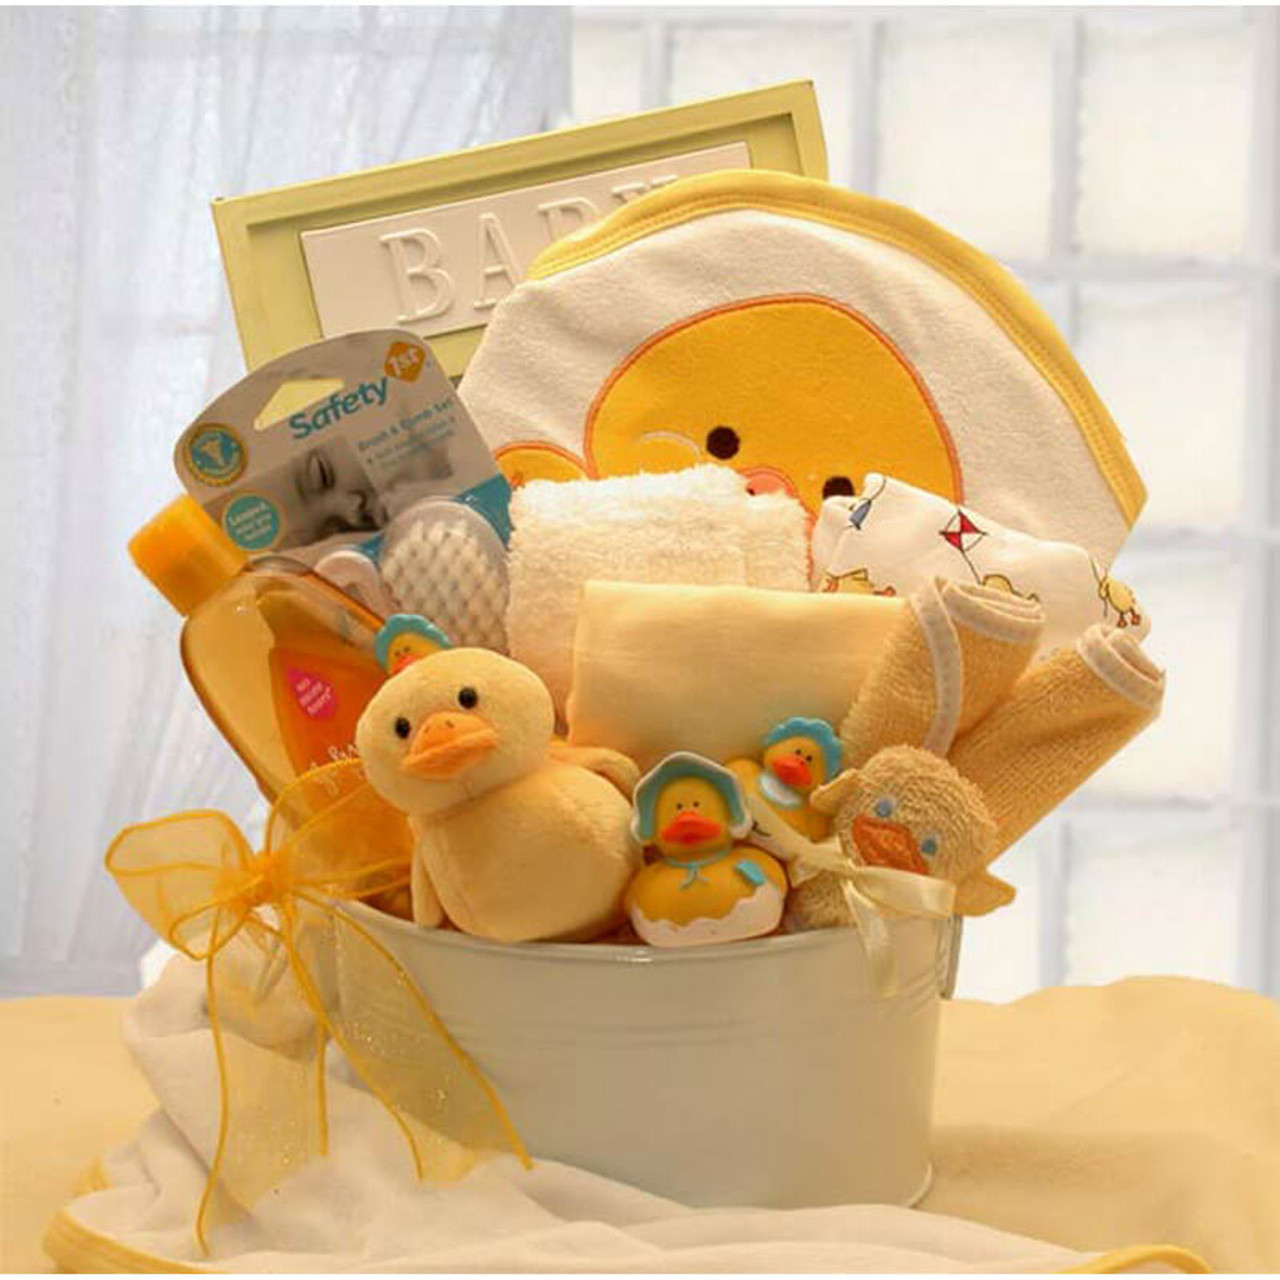 New Baby Time Gift Basket Buy Now - $59.95